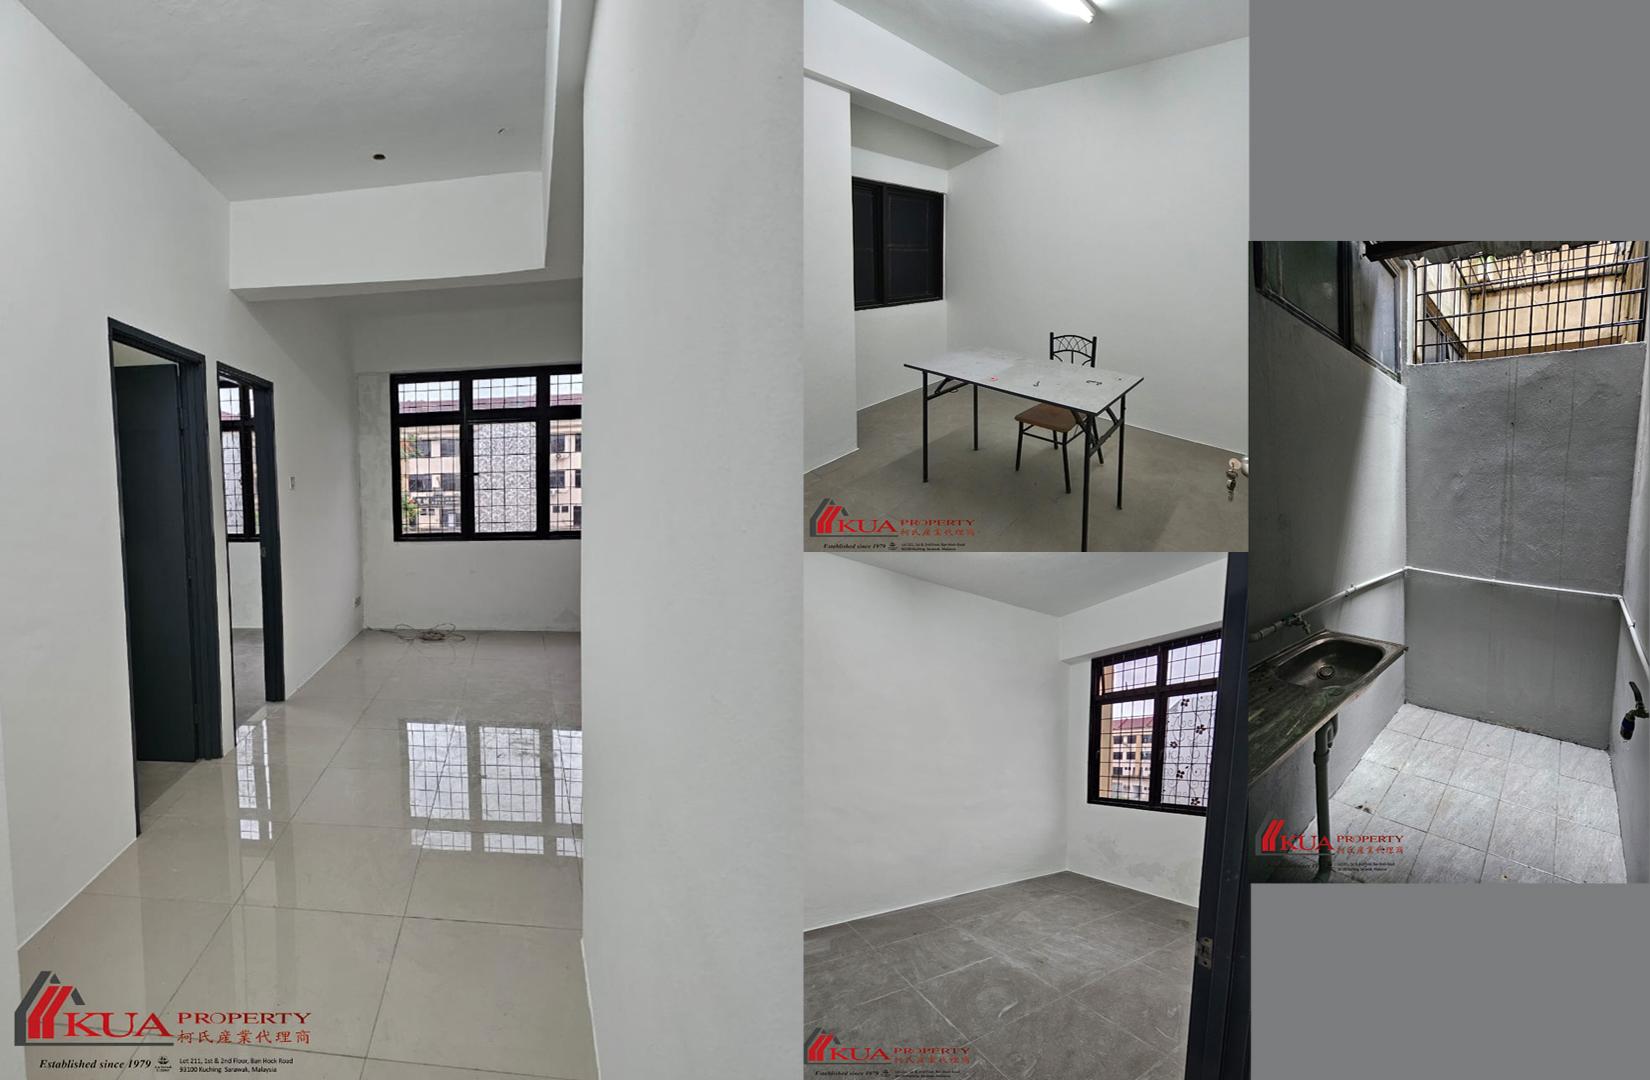 2nd Floor Shophouse/Apartment FOR RENT! 📍Located at MJC